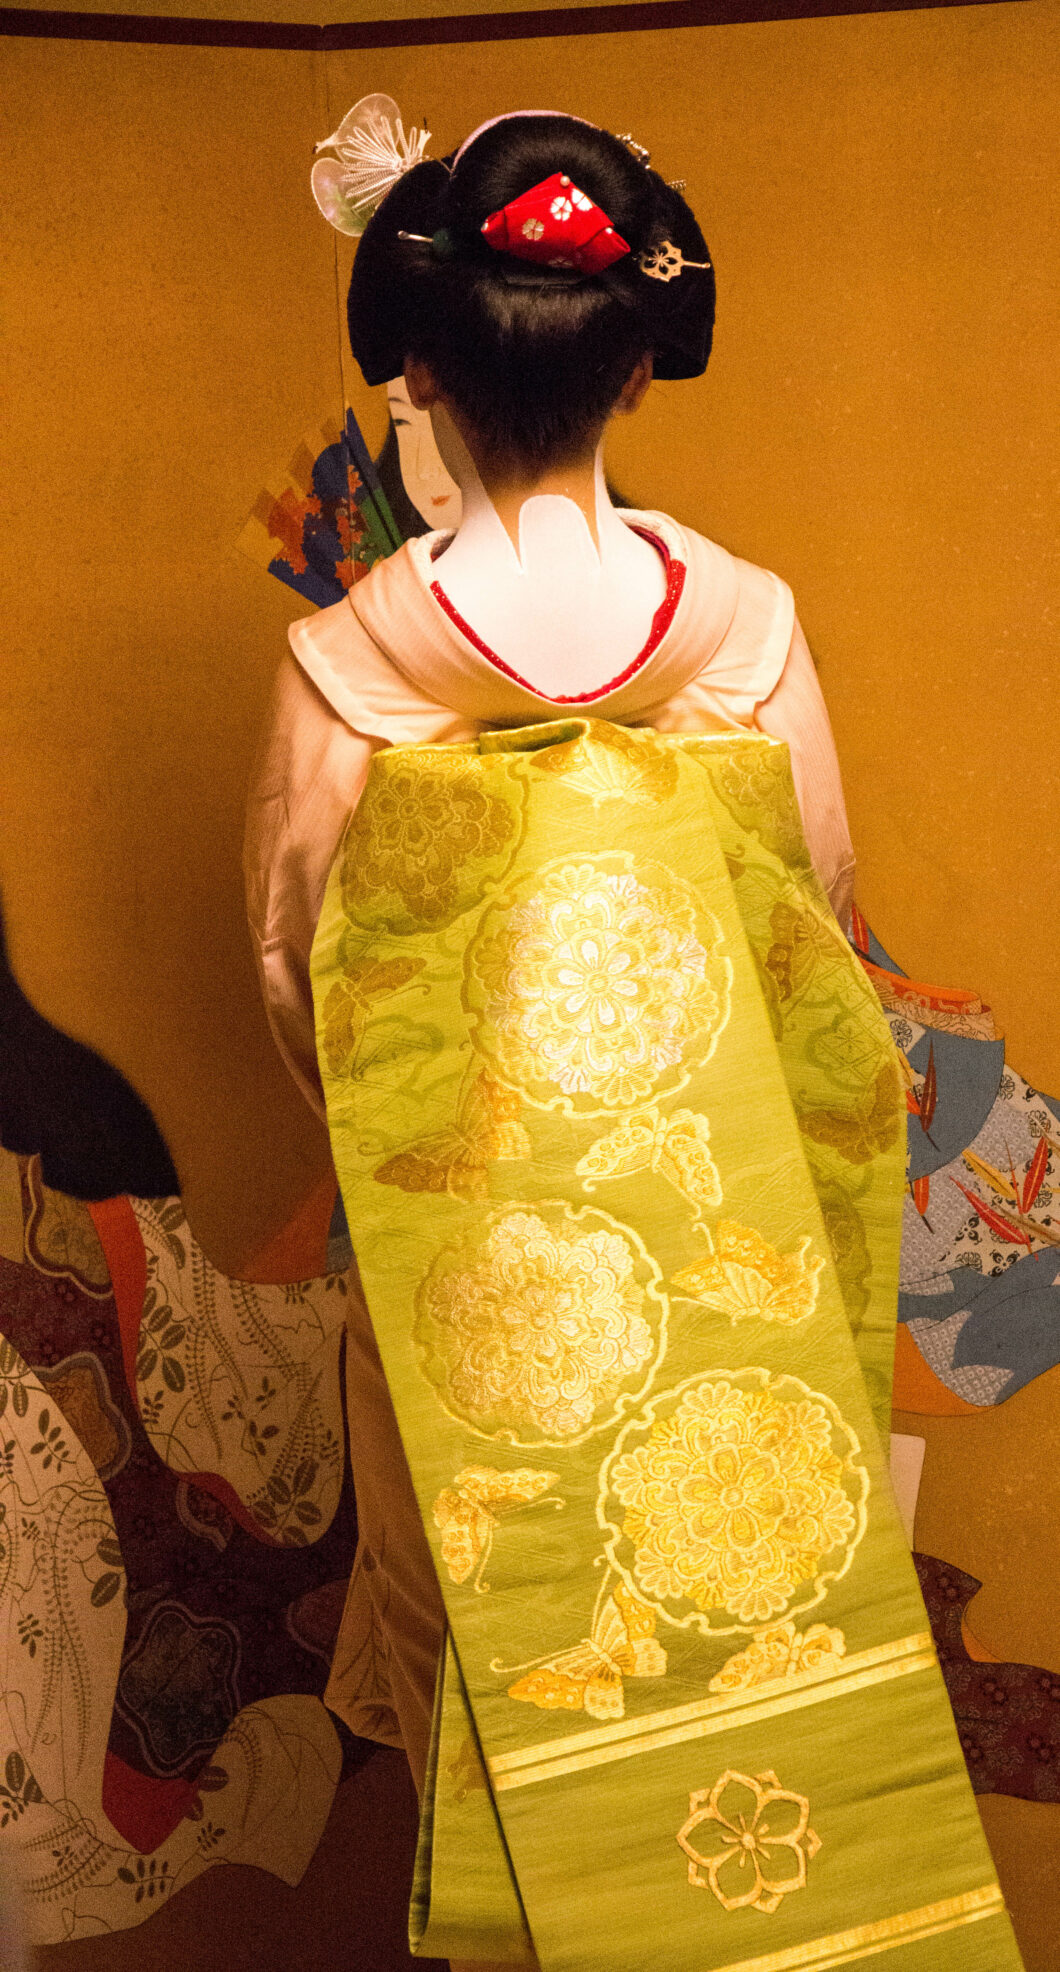 A Japanese Maiko stands with her back to the camera, showing the traditional sash garment called and Obi. The garment is a stunning gold color with intricate patterns.